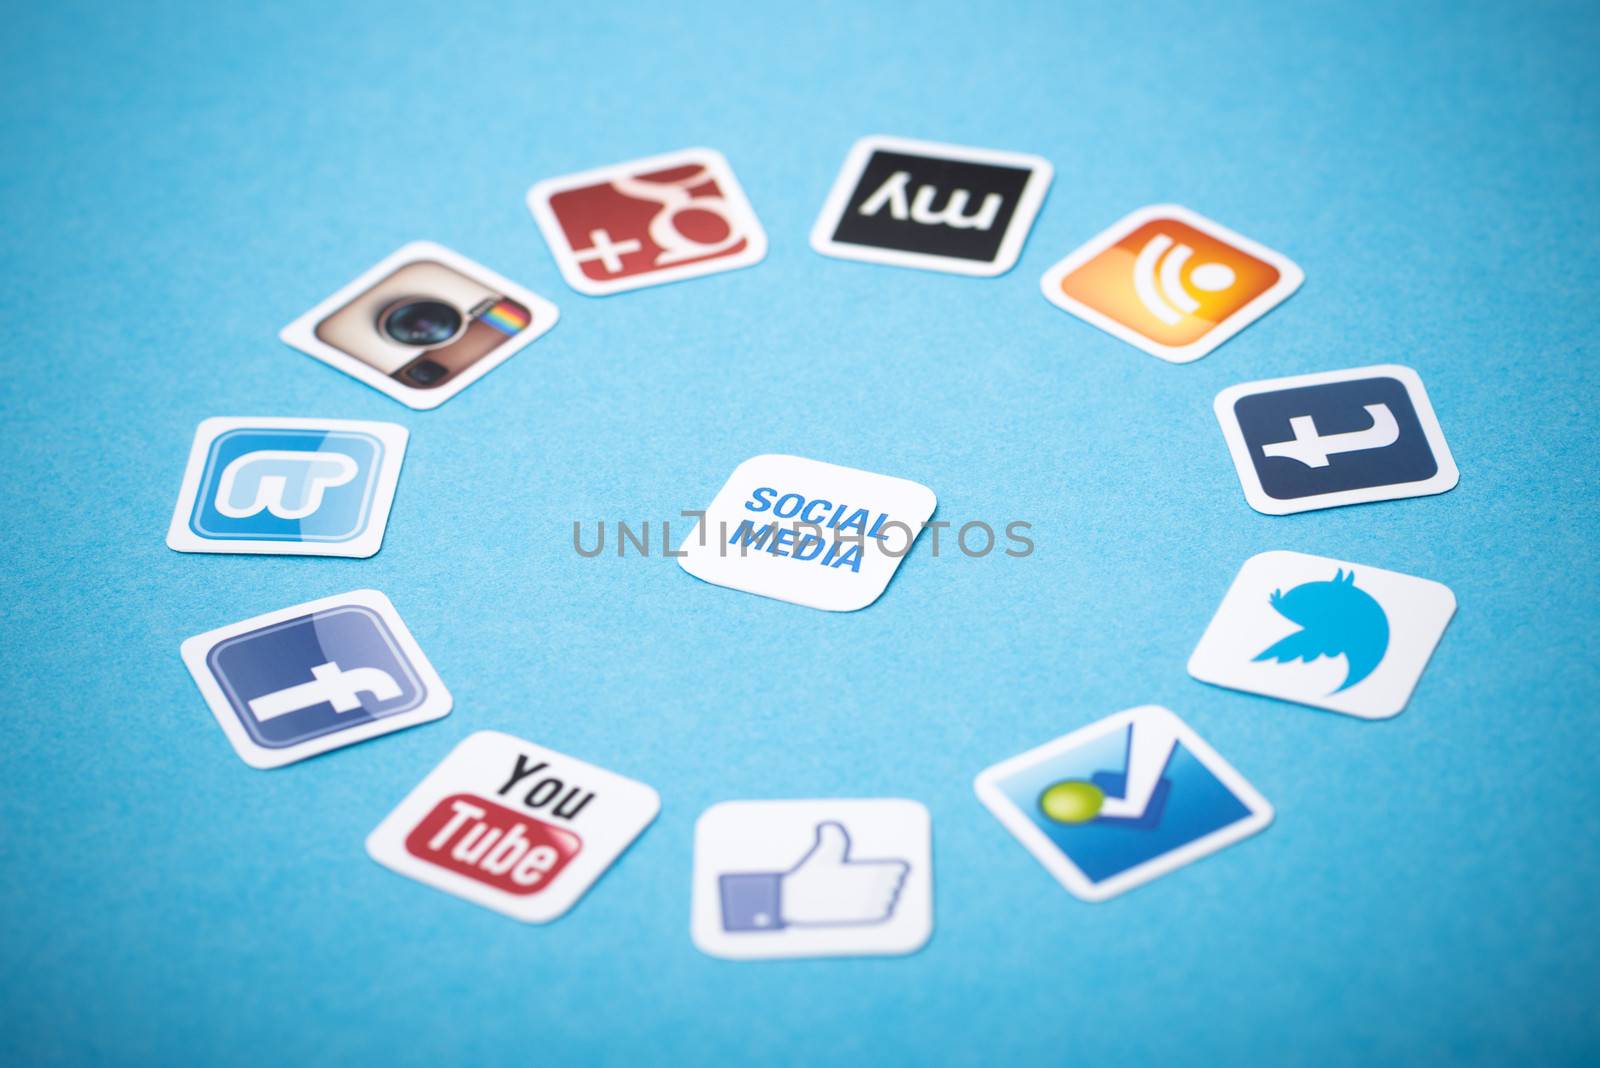 Kiev, Ukraine - June 11, 2013 - A logotype collection of well-known social media brands printed on paper and placed around on a blue background.